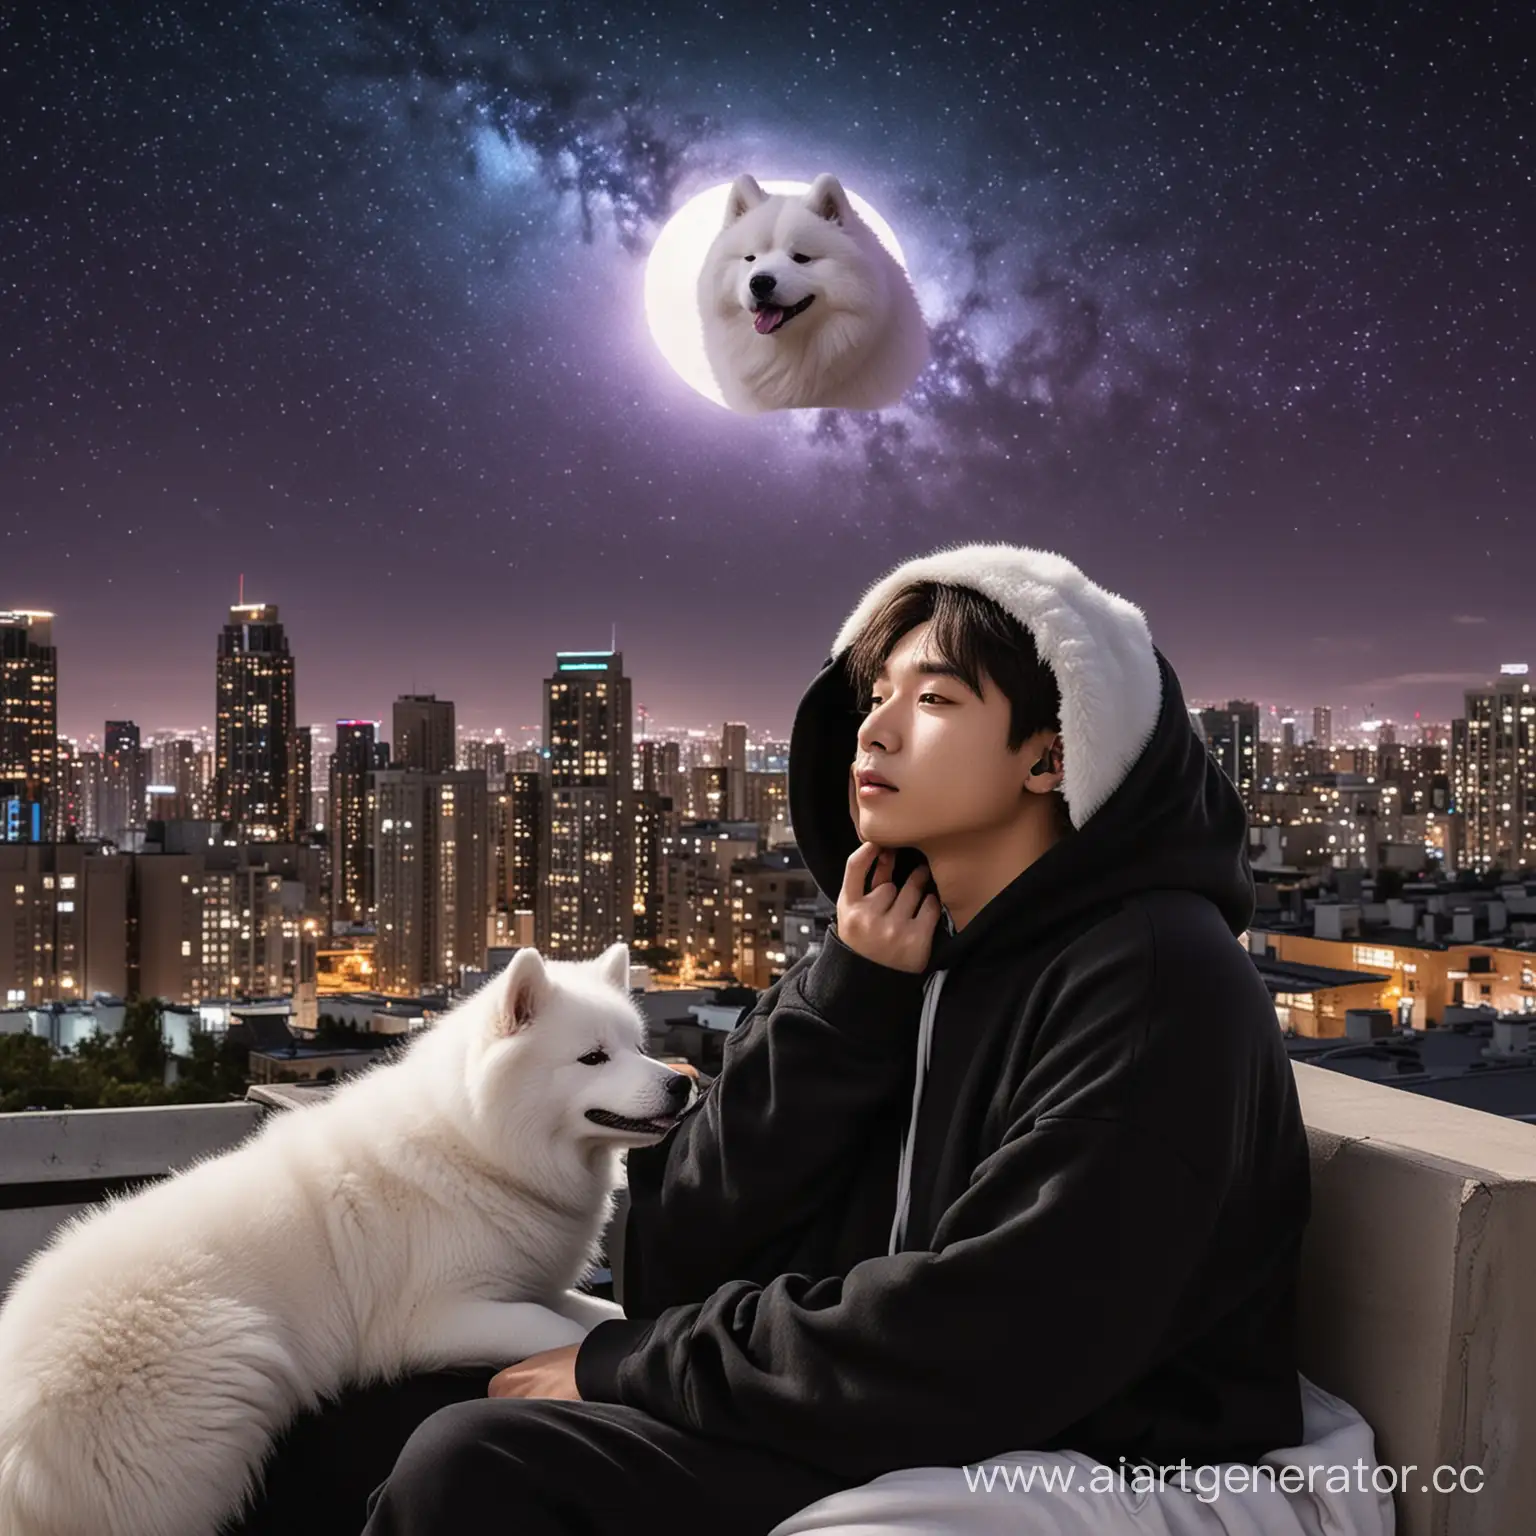 Young-Man-Contemplating-Under-Starry-Sky-with-Samoyed-Dog